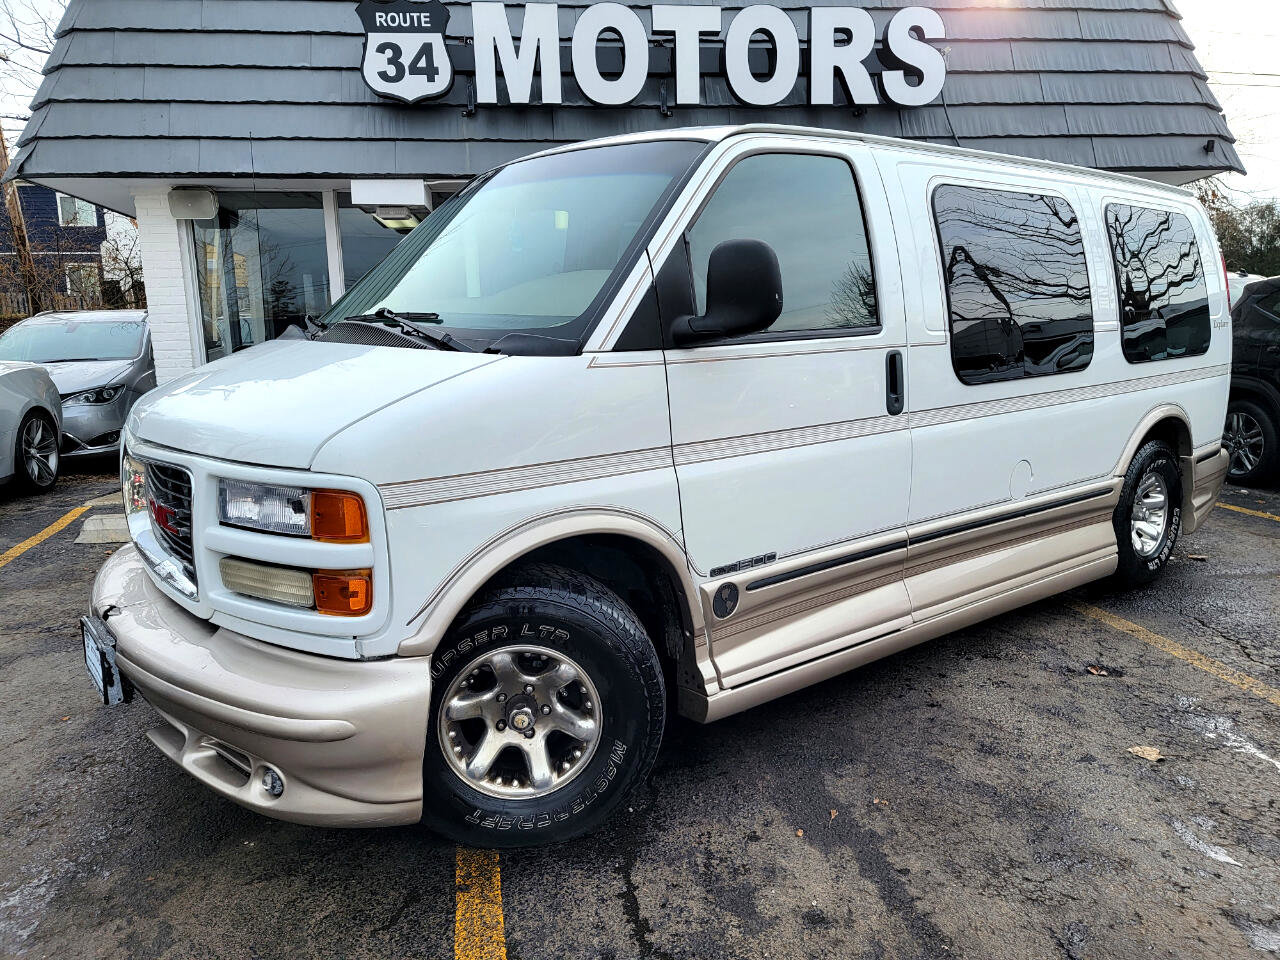 Used GMC Savana 1500 Van for Sale Near Me in Naperville, IL - Autotrader